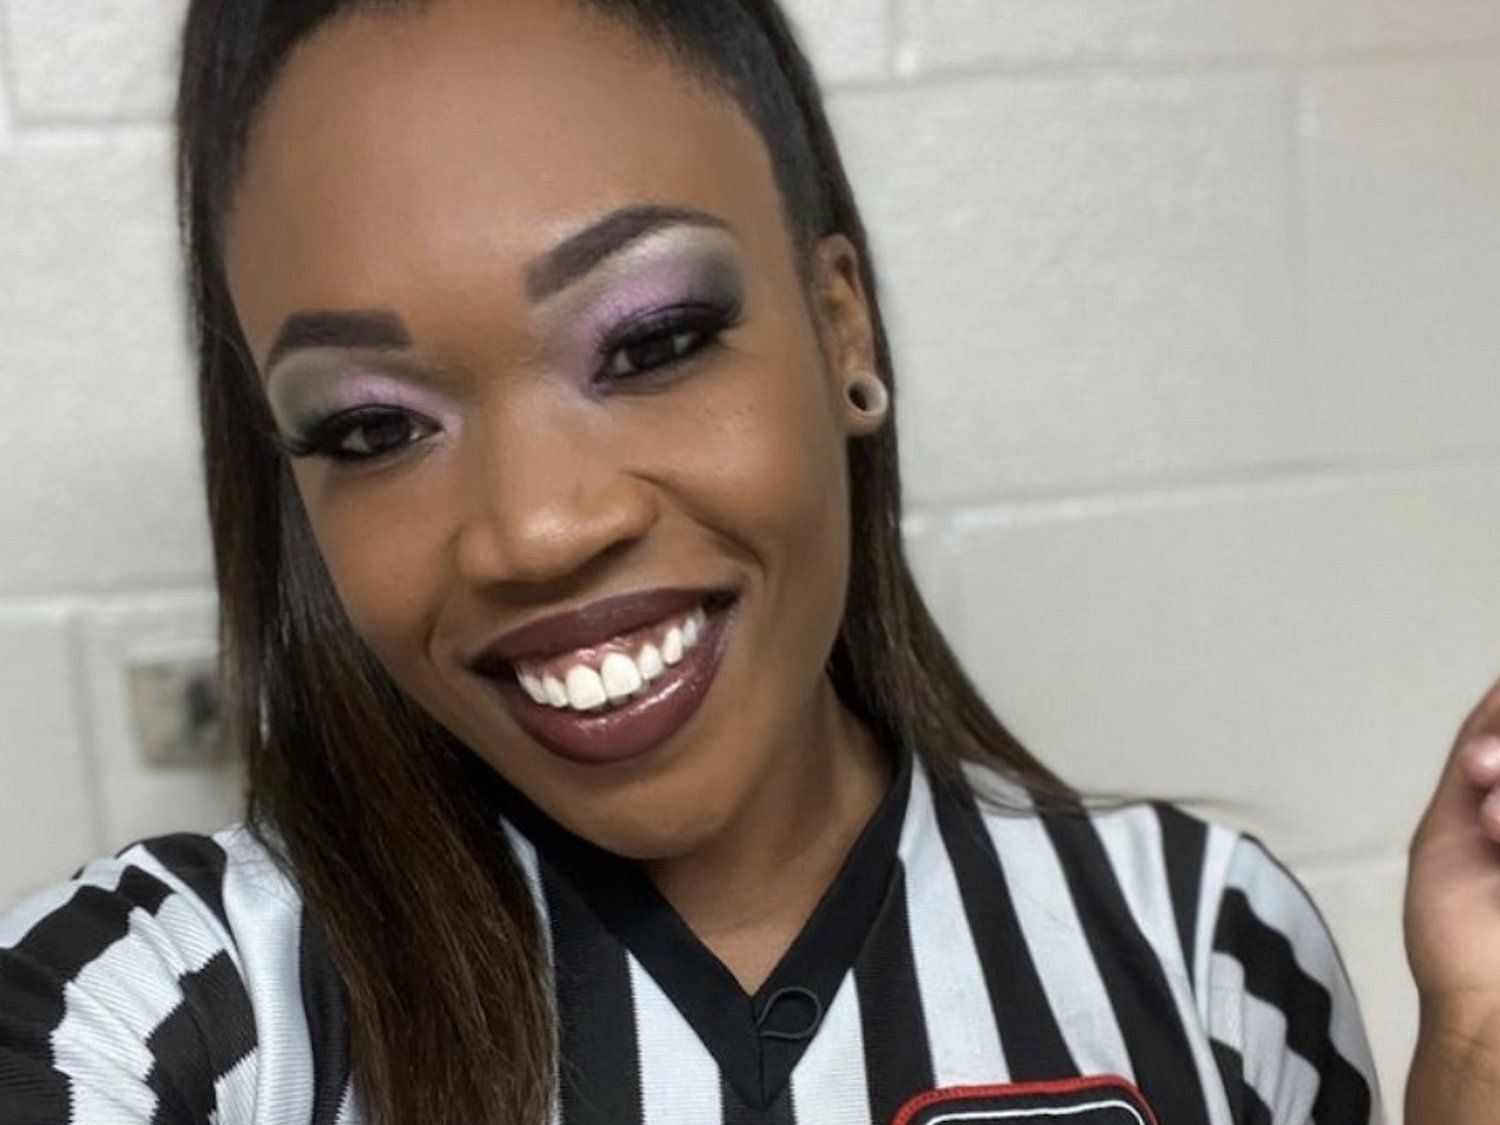 WWE referee Aja Smith is a former 24/7 Champion